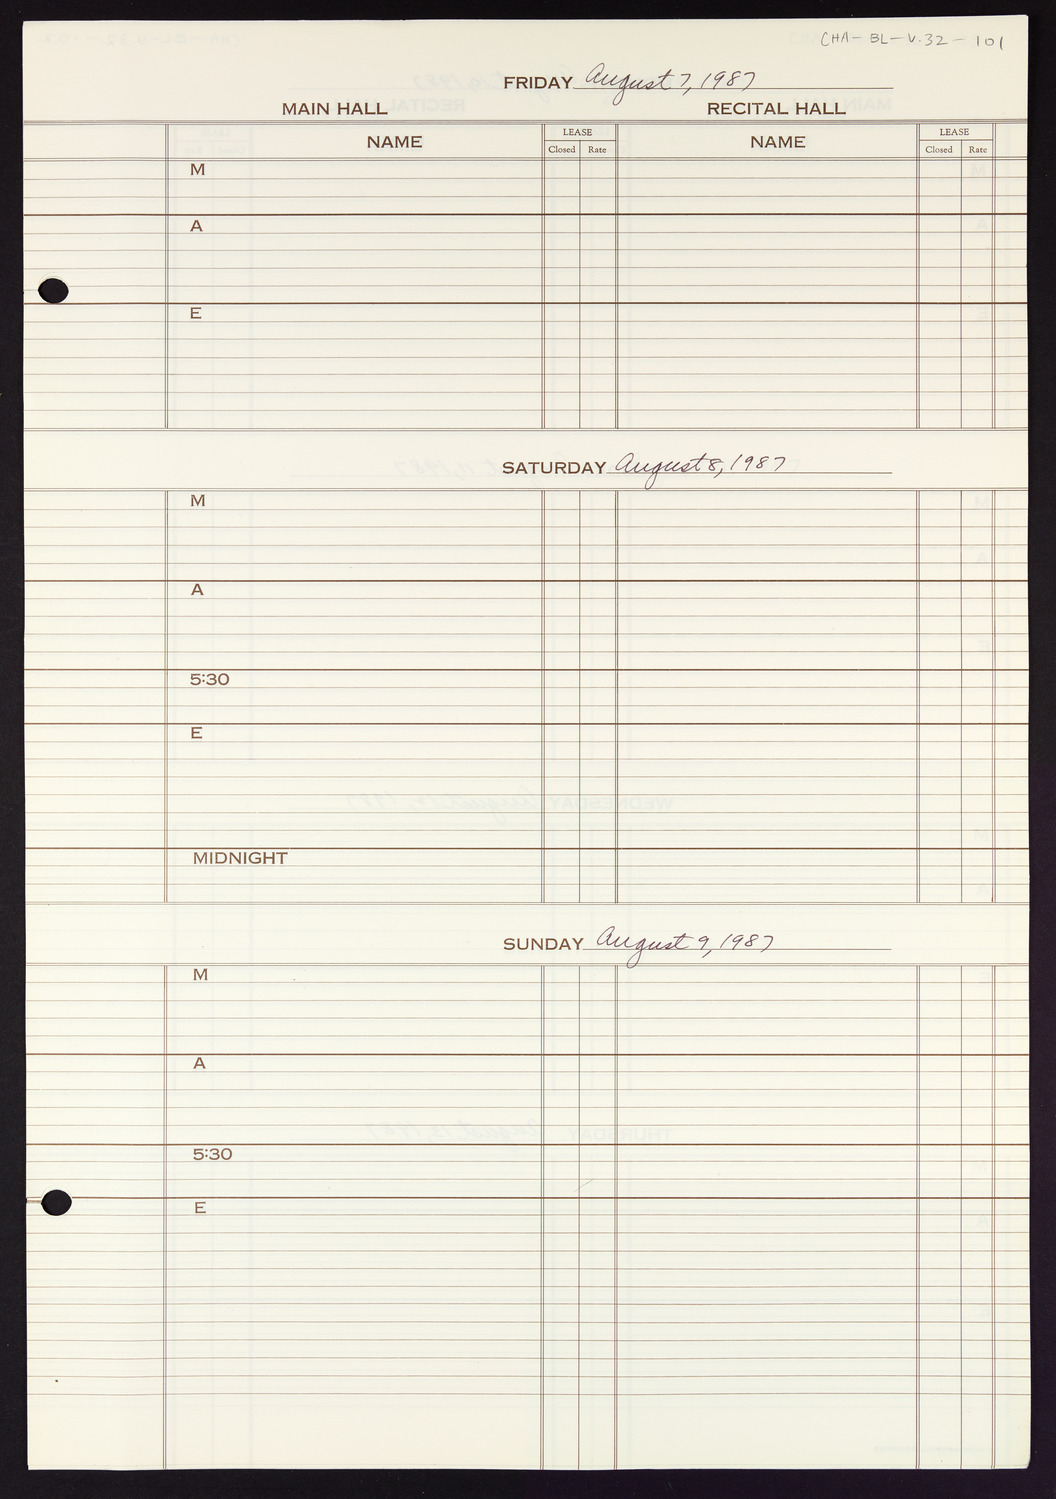 Carnegie Hall Booking Ledger, volume 32, page 101